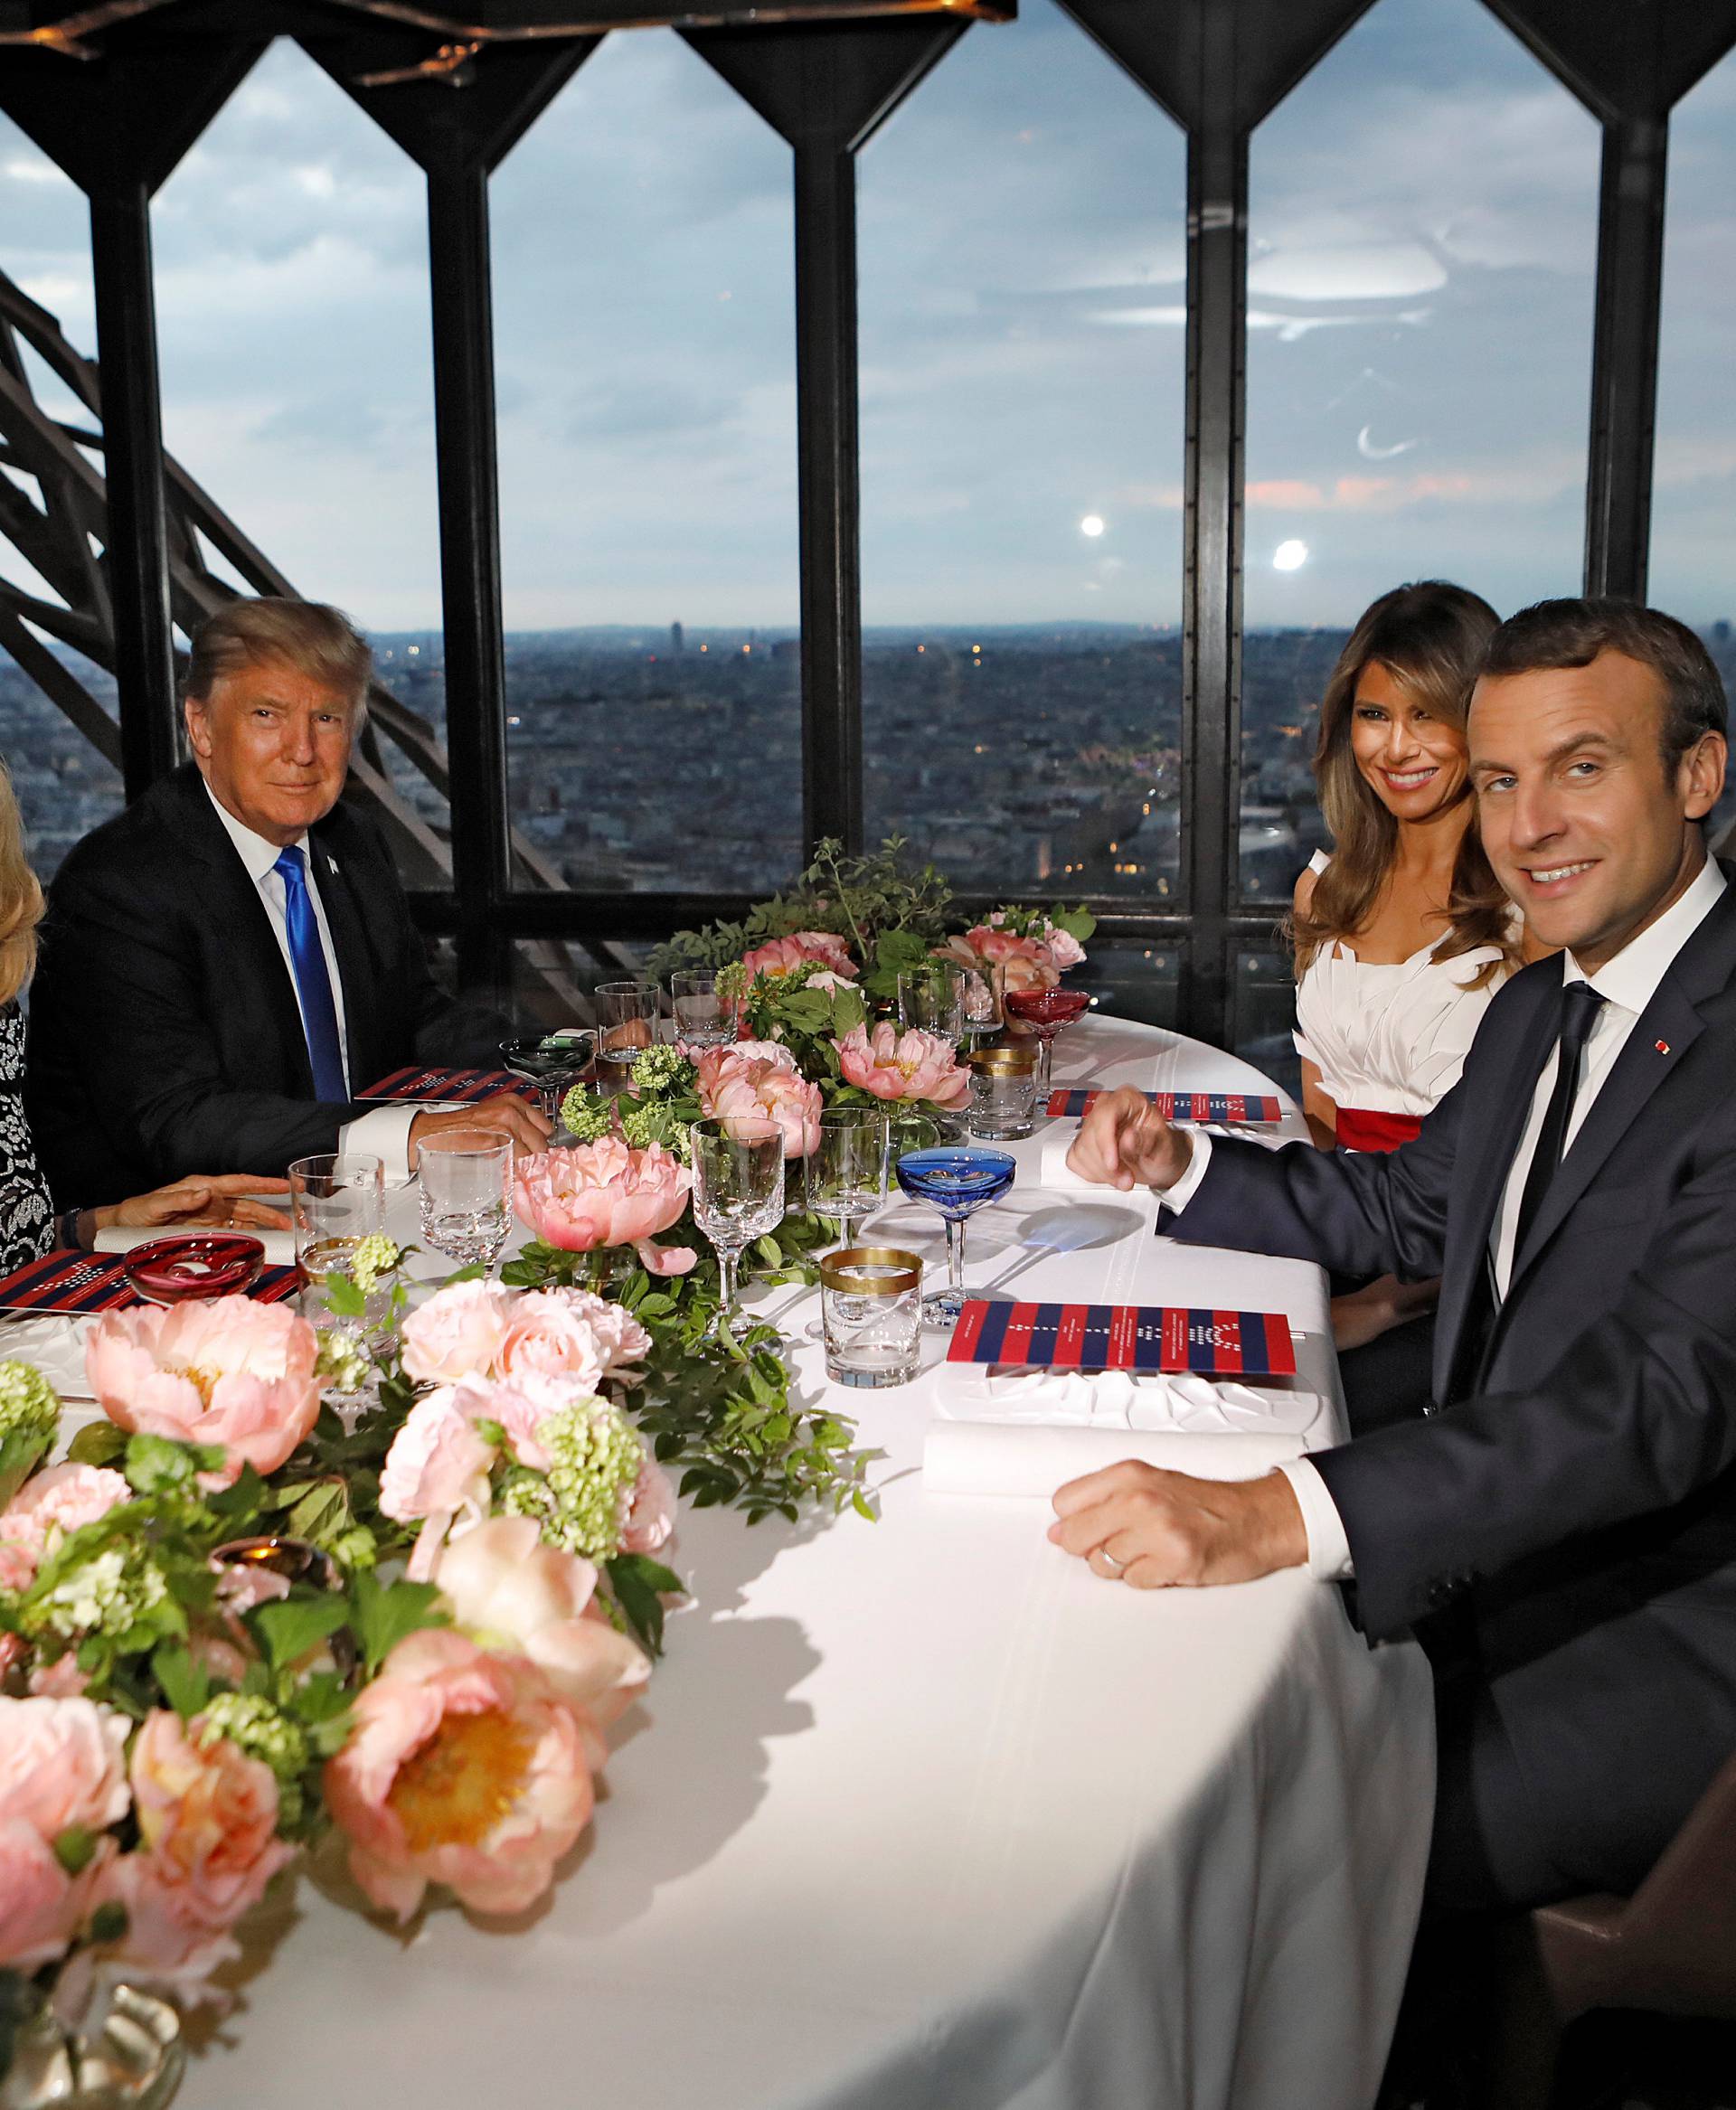 Brigitte Macron, wife of French President Emmanuel Macron, U.S. President Donald Trump and First lady Melania Trump pose at their table at the Jules Verne restaurant for a private dinner at the Eiffel Tower in Paris